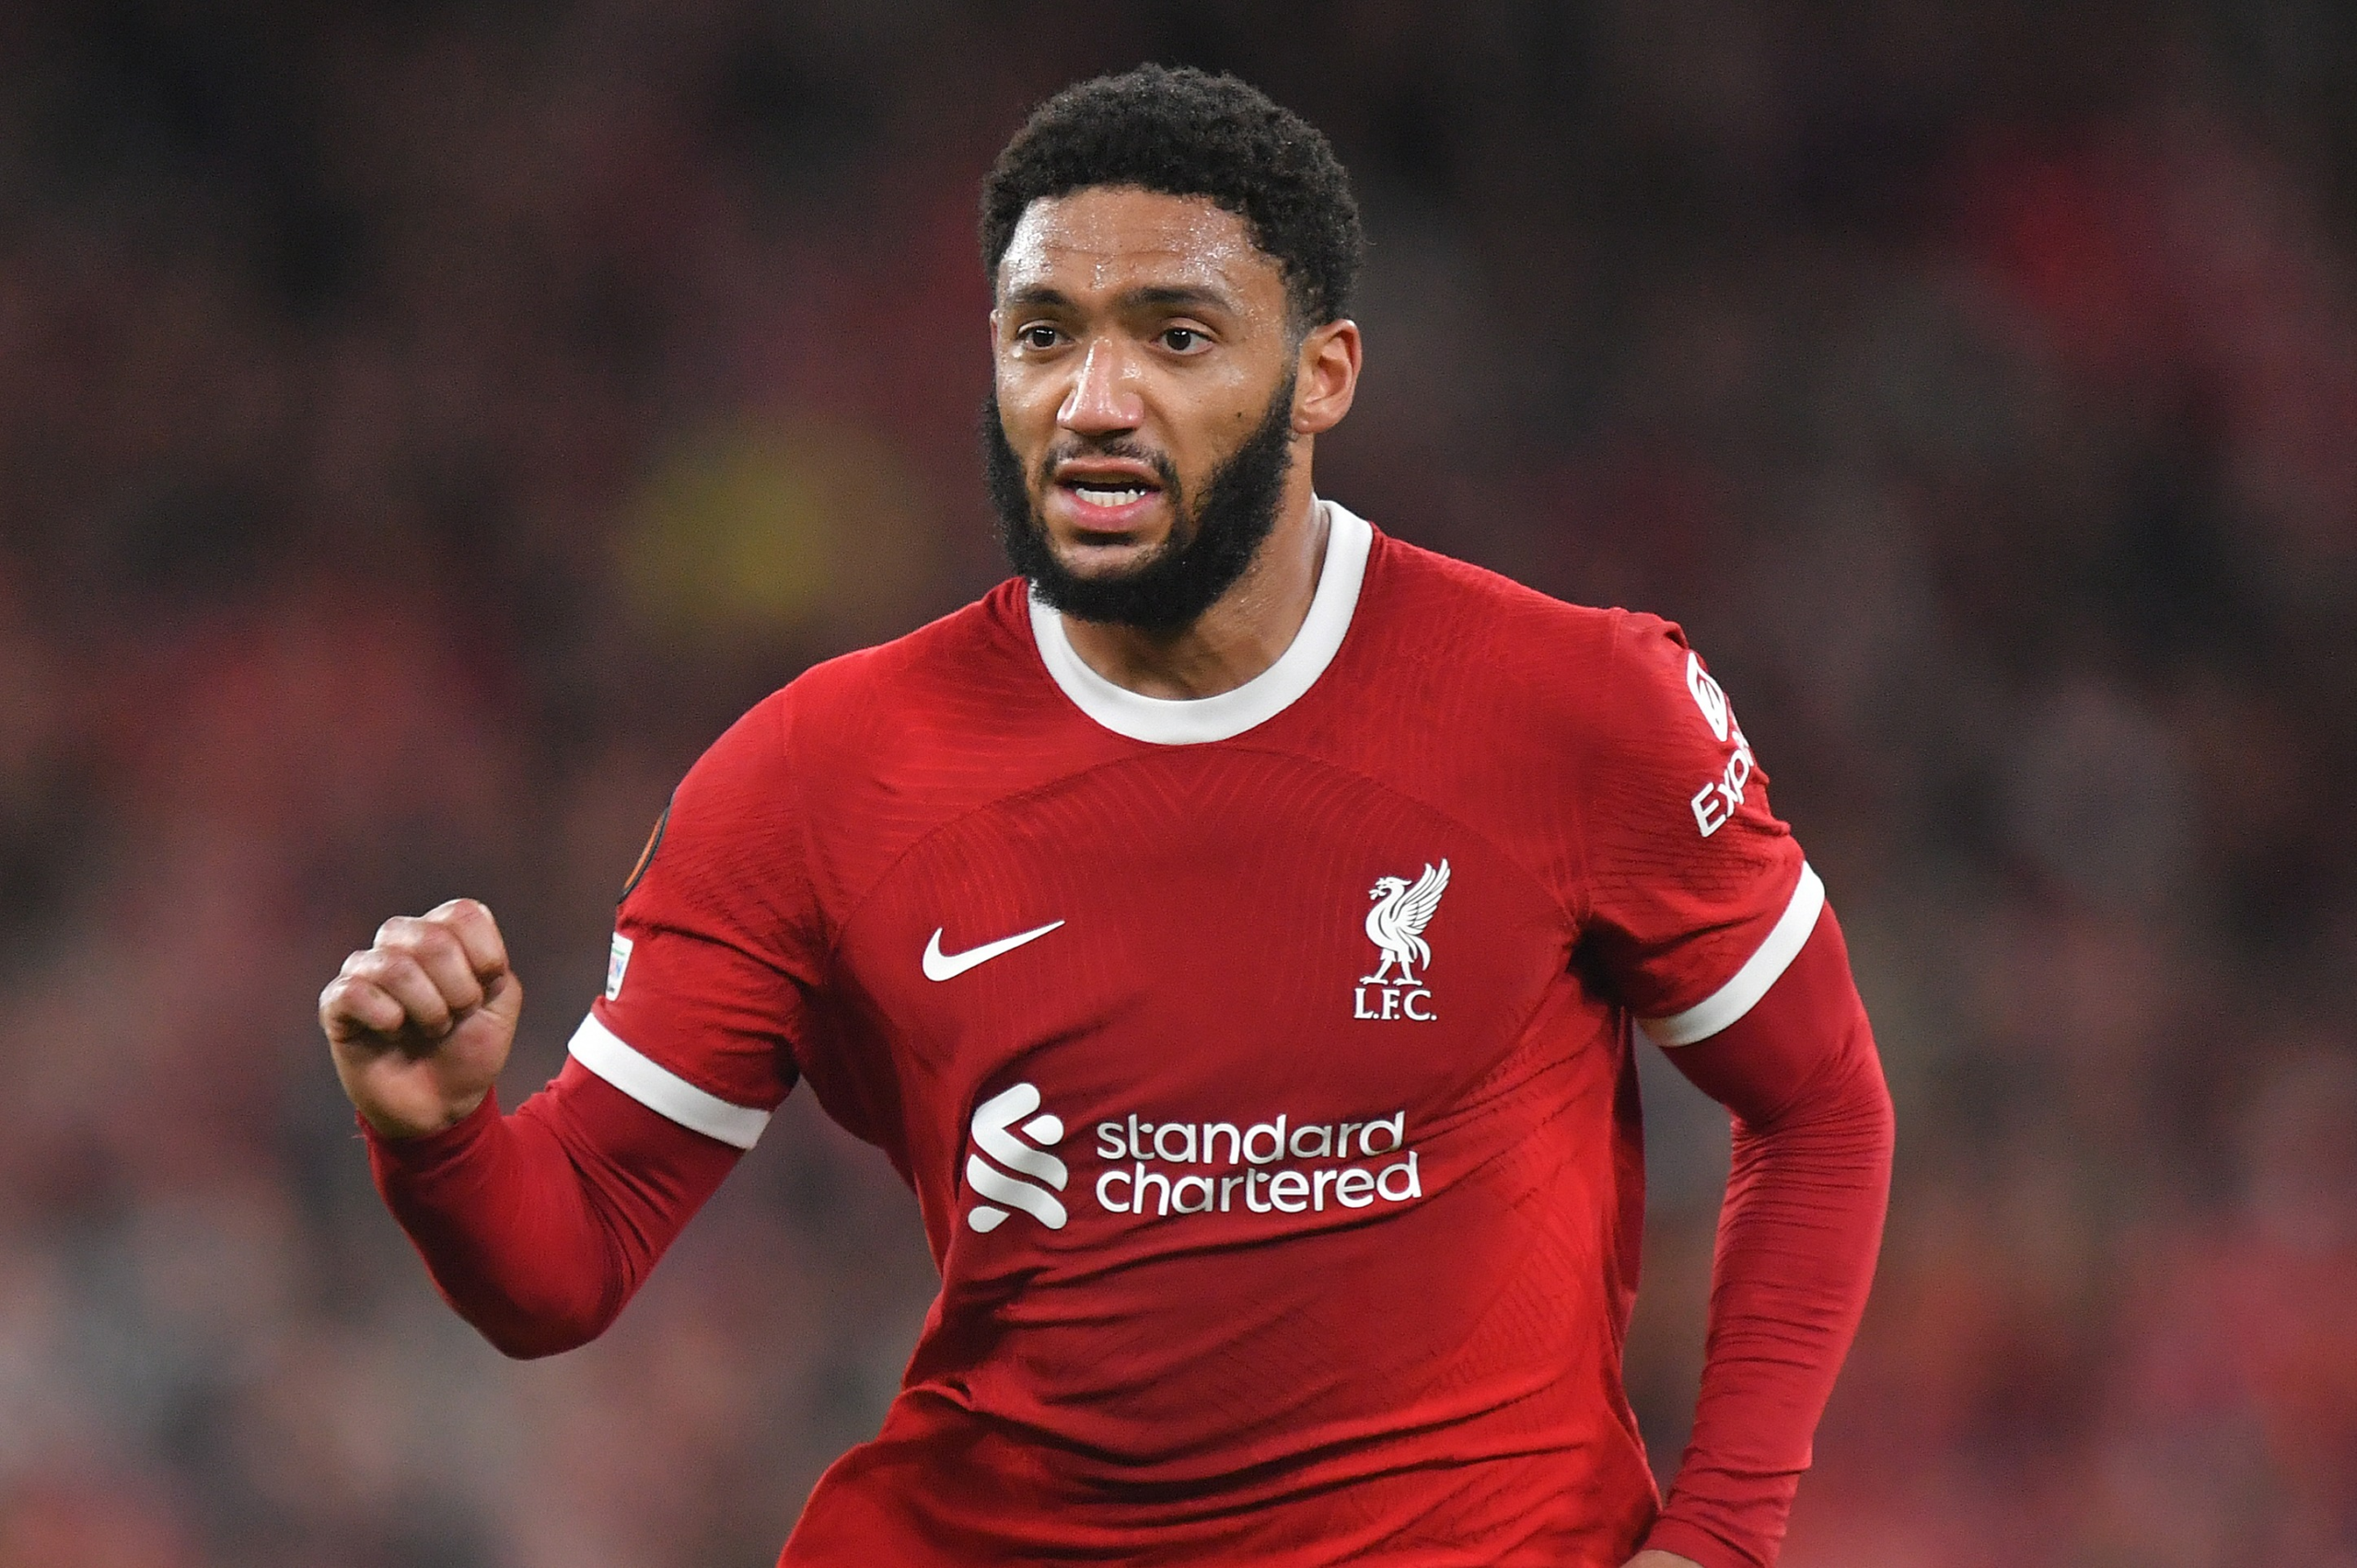 Joe Gomez joins list of potential Liverpool exits as club prepare for overhaul